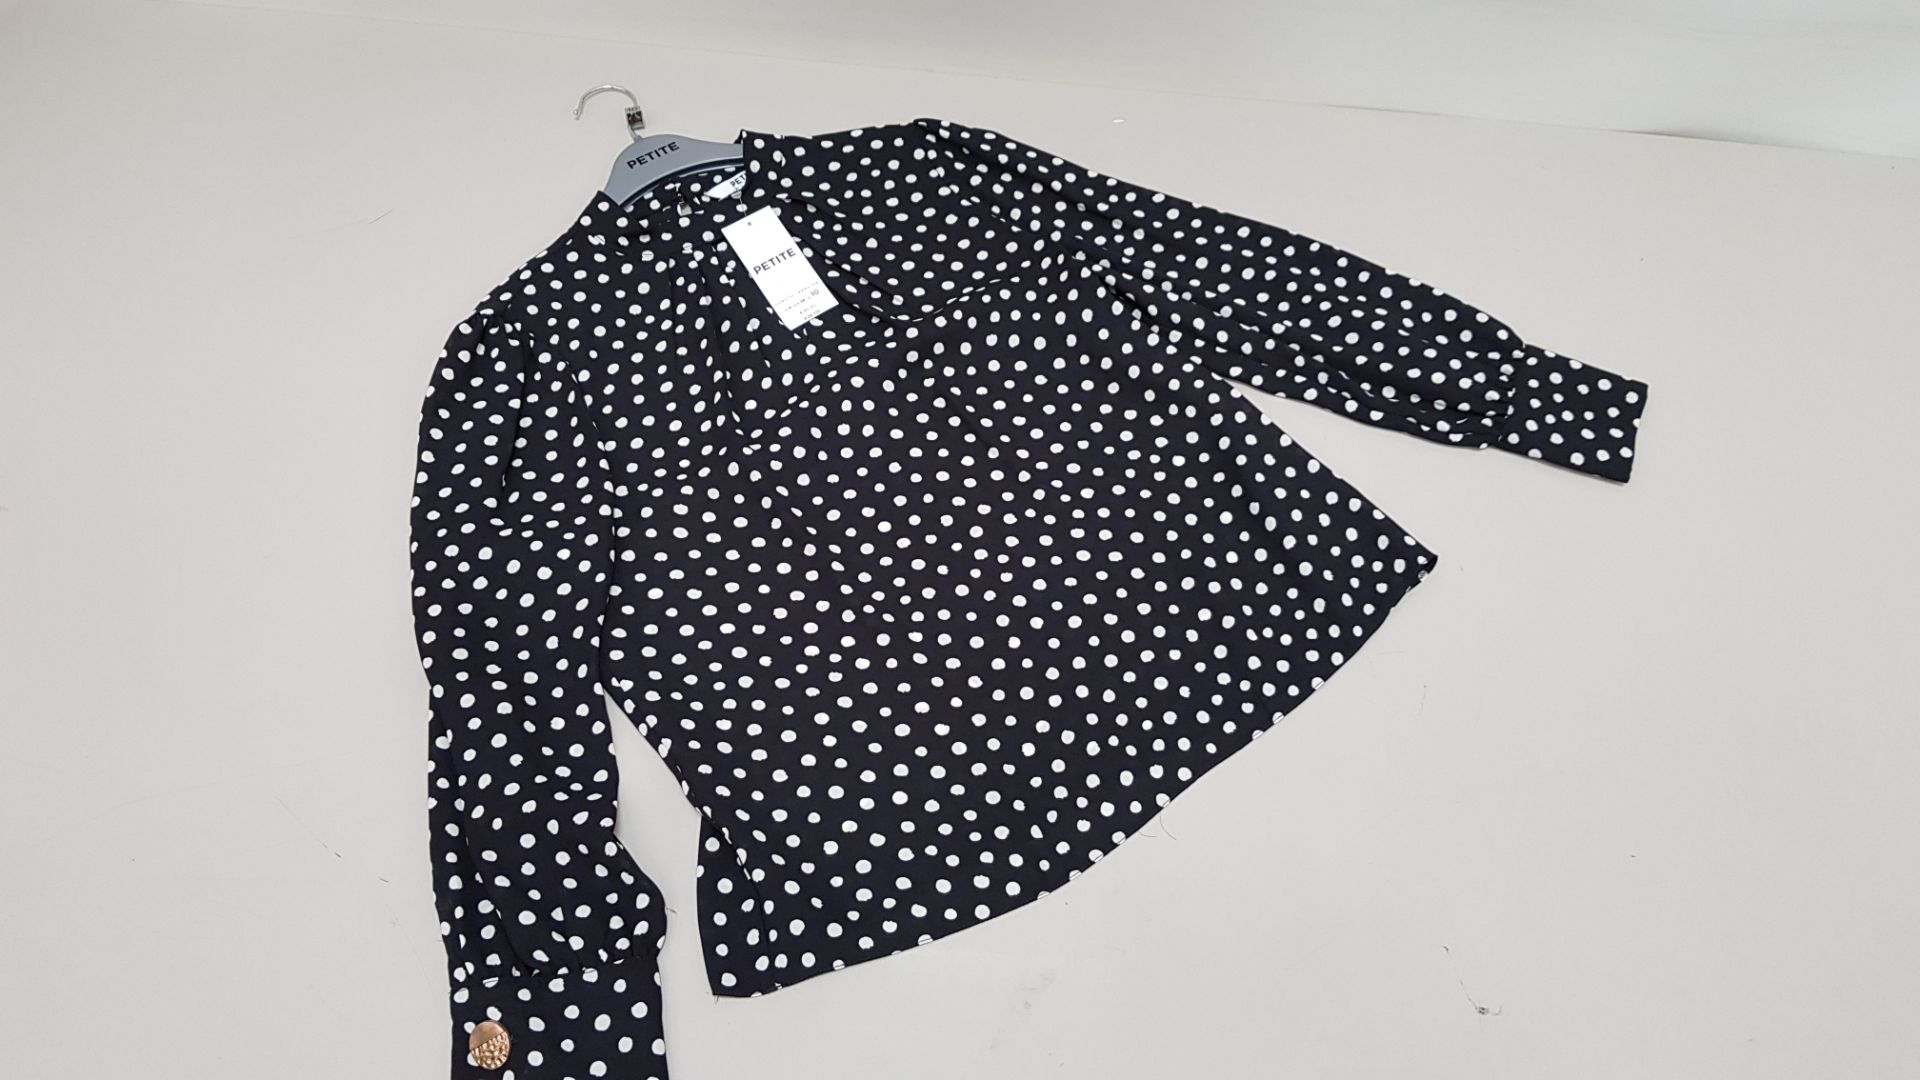 40 X BRAND NEW DOROTHY PERKINS PETITE DOTTED BLOUSES UK SIZE 12 RRP £26.00 (TOTAL RRP £1040.00)